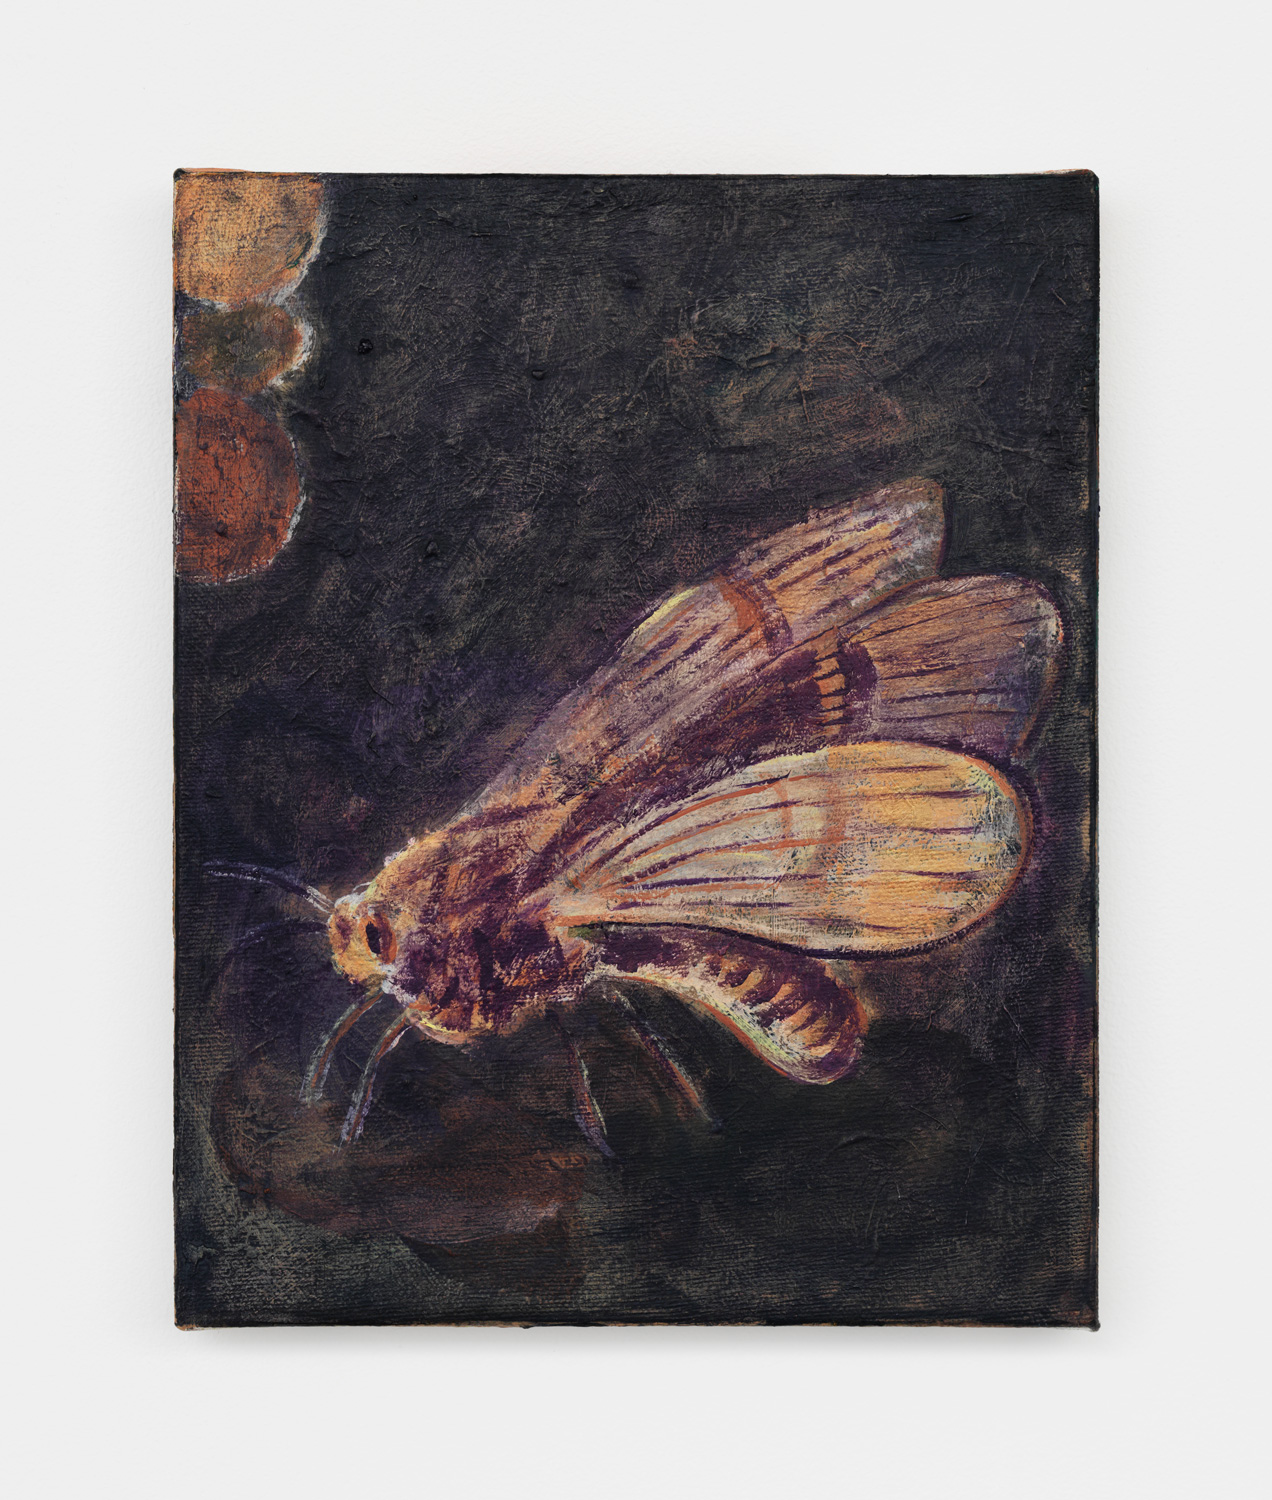 Zach Bruder, Lure, 2018, acrylic and flashe on canvas, 10h x 8w in.